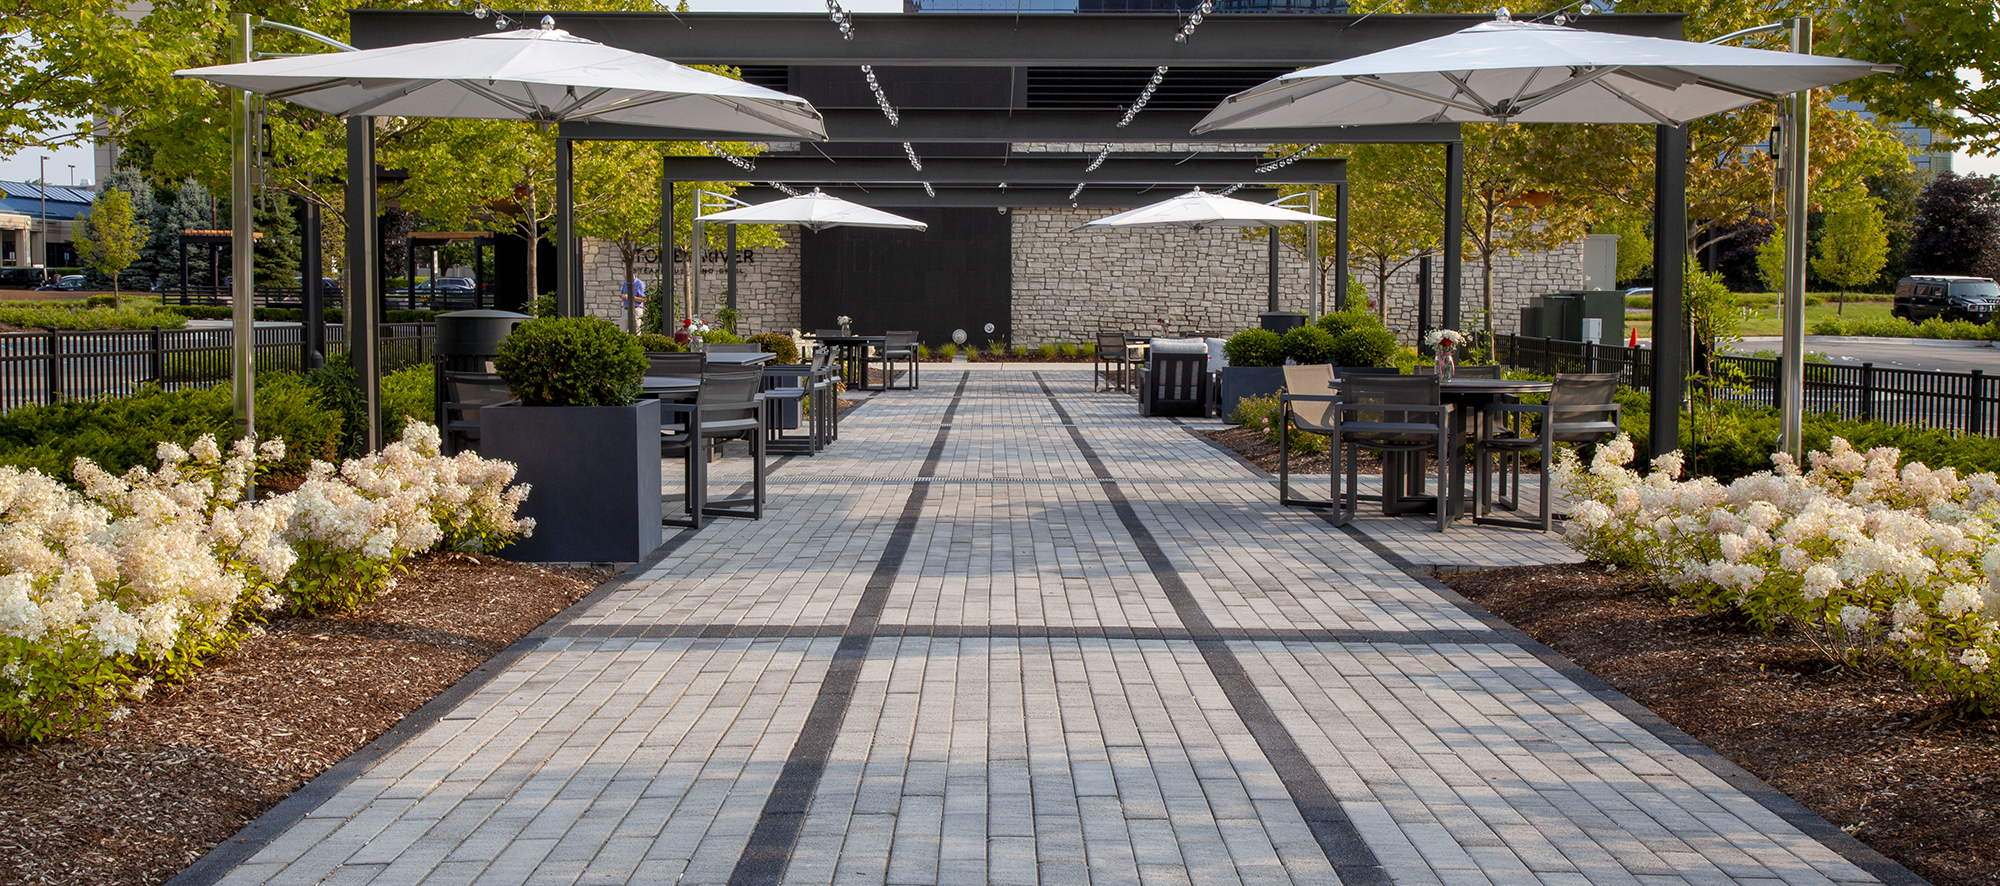 Promenade Plank pavers create a striped pattern in two tones under a pergola, with tables, chairs and landscaping.